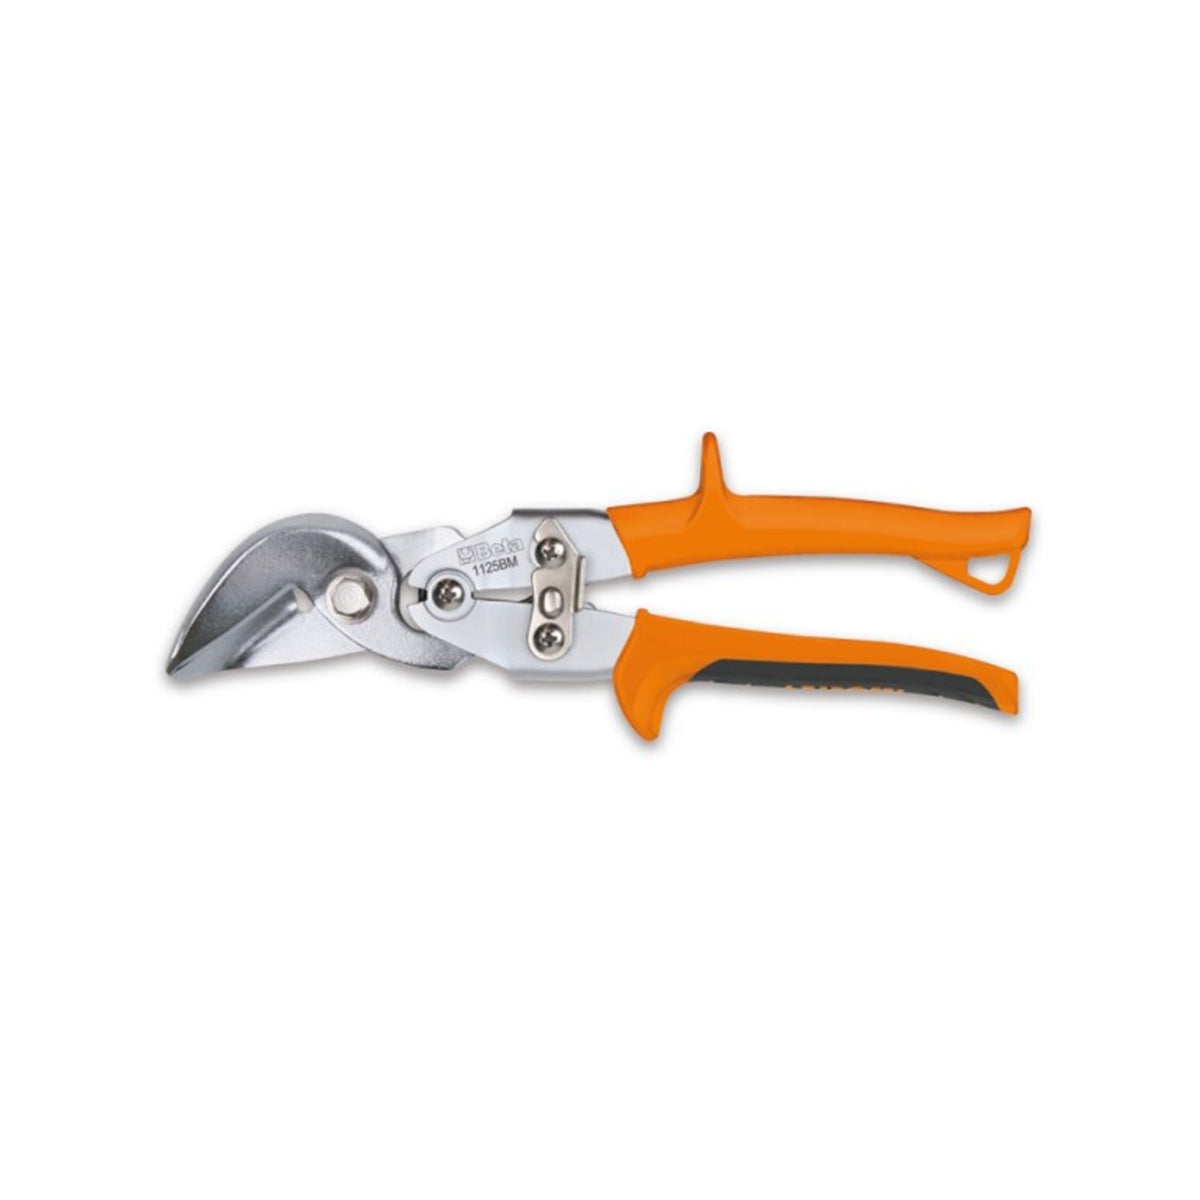 Compound leverage shears for straight and right cuts - Beta 1125